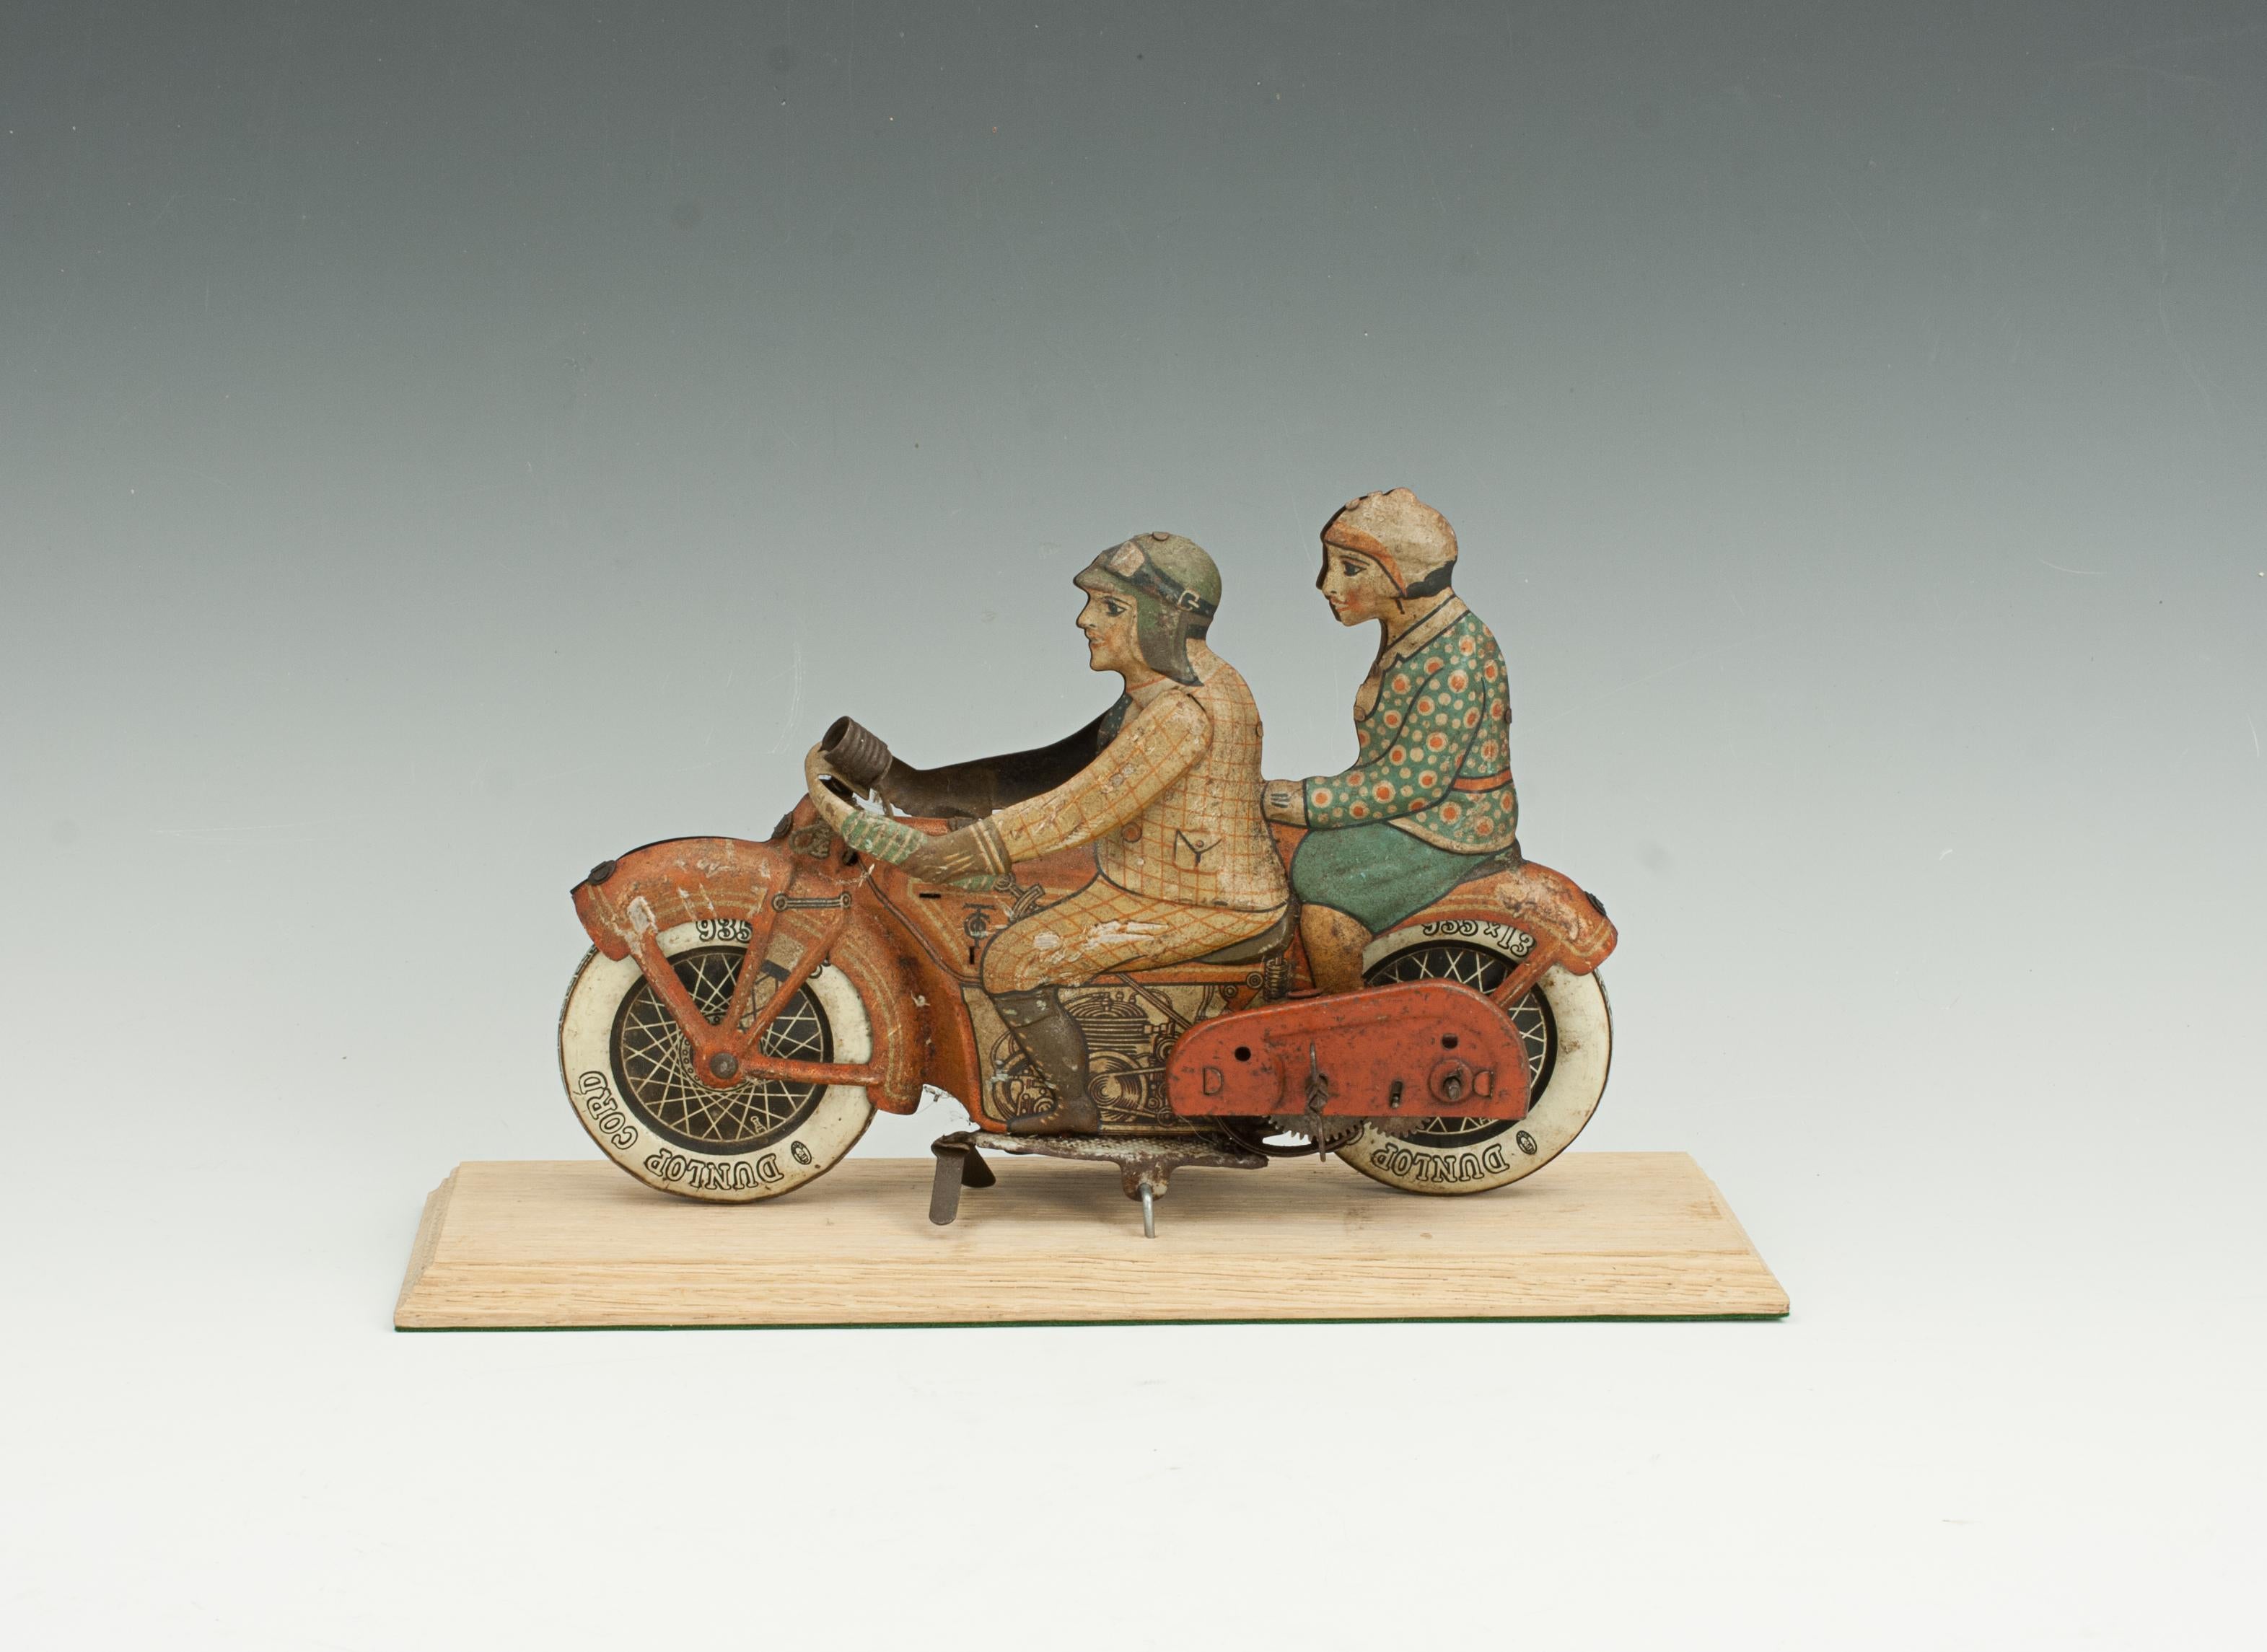 Tipp & Co Clockwork Motorcycle With Rider & Pillion Passenger For Sale 2